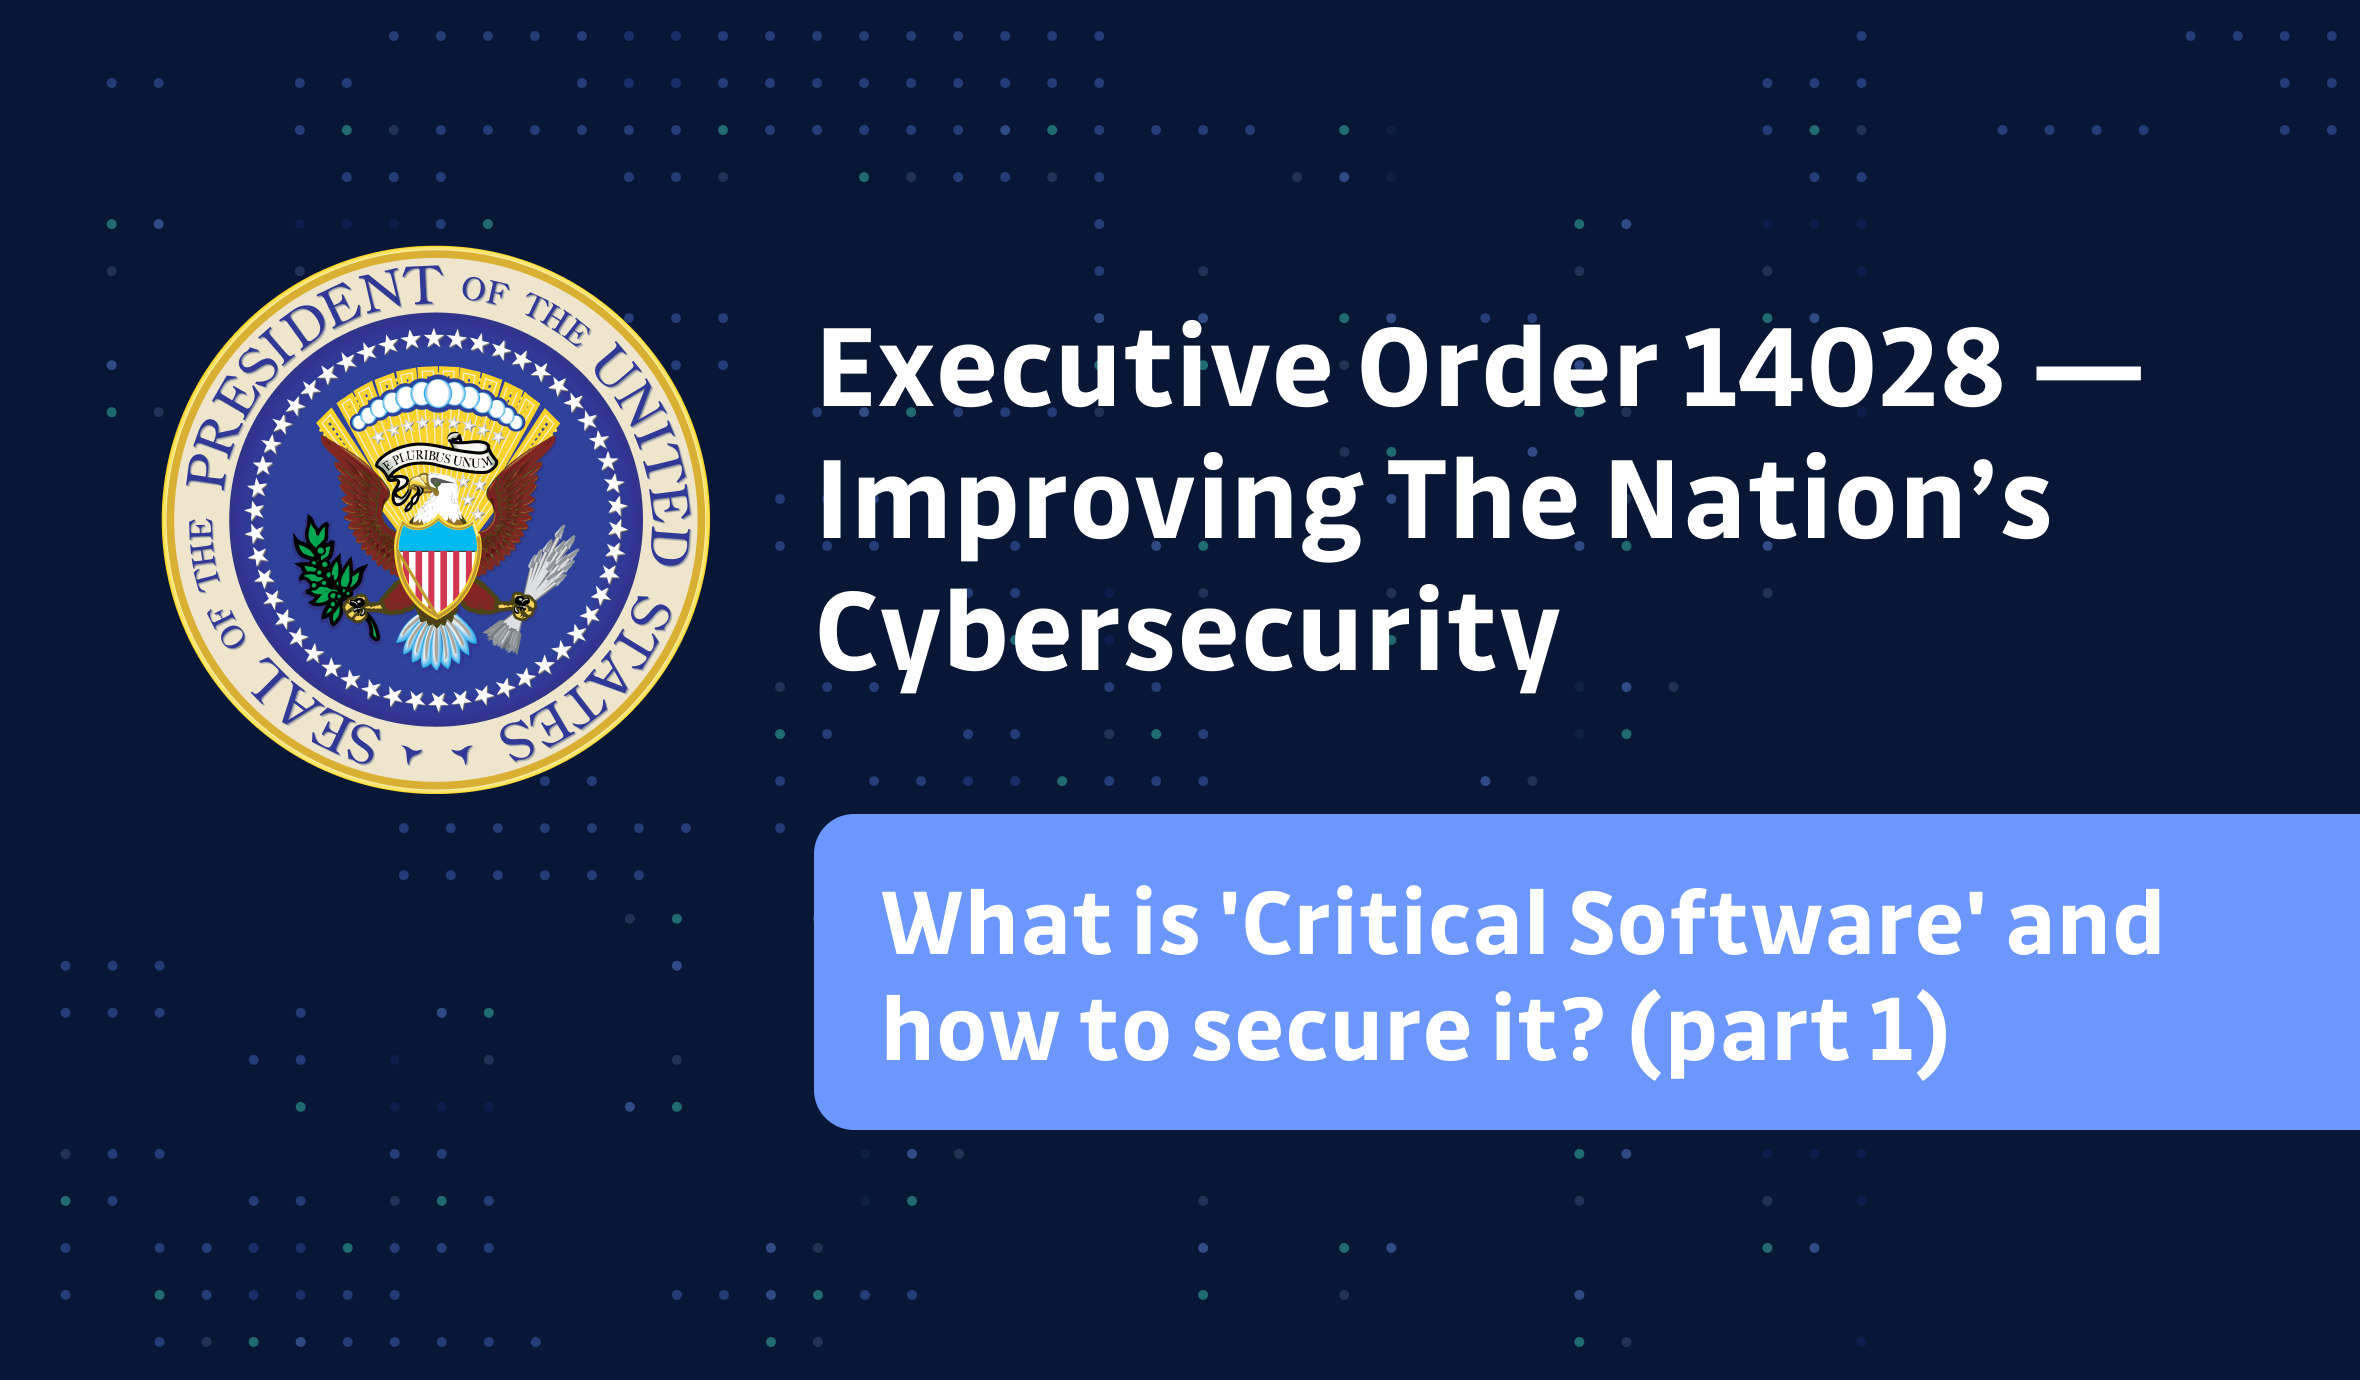 Improving the Nation’s Cybersecurity — What is 'Critical Software' and how should it be secured? (part 1)